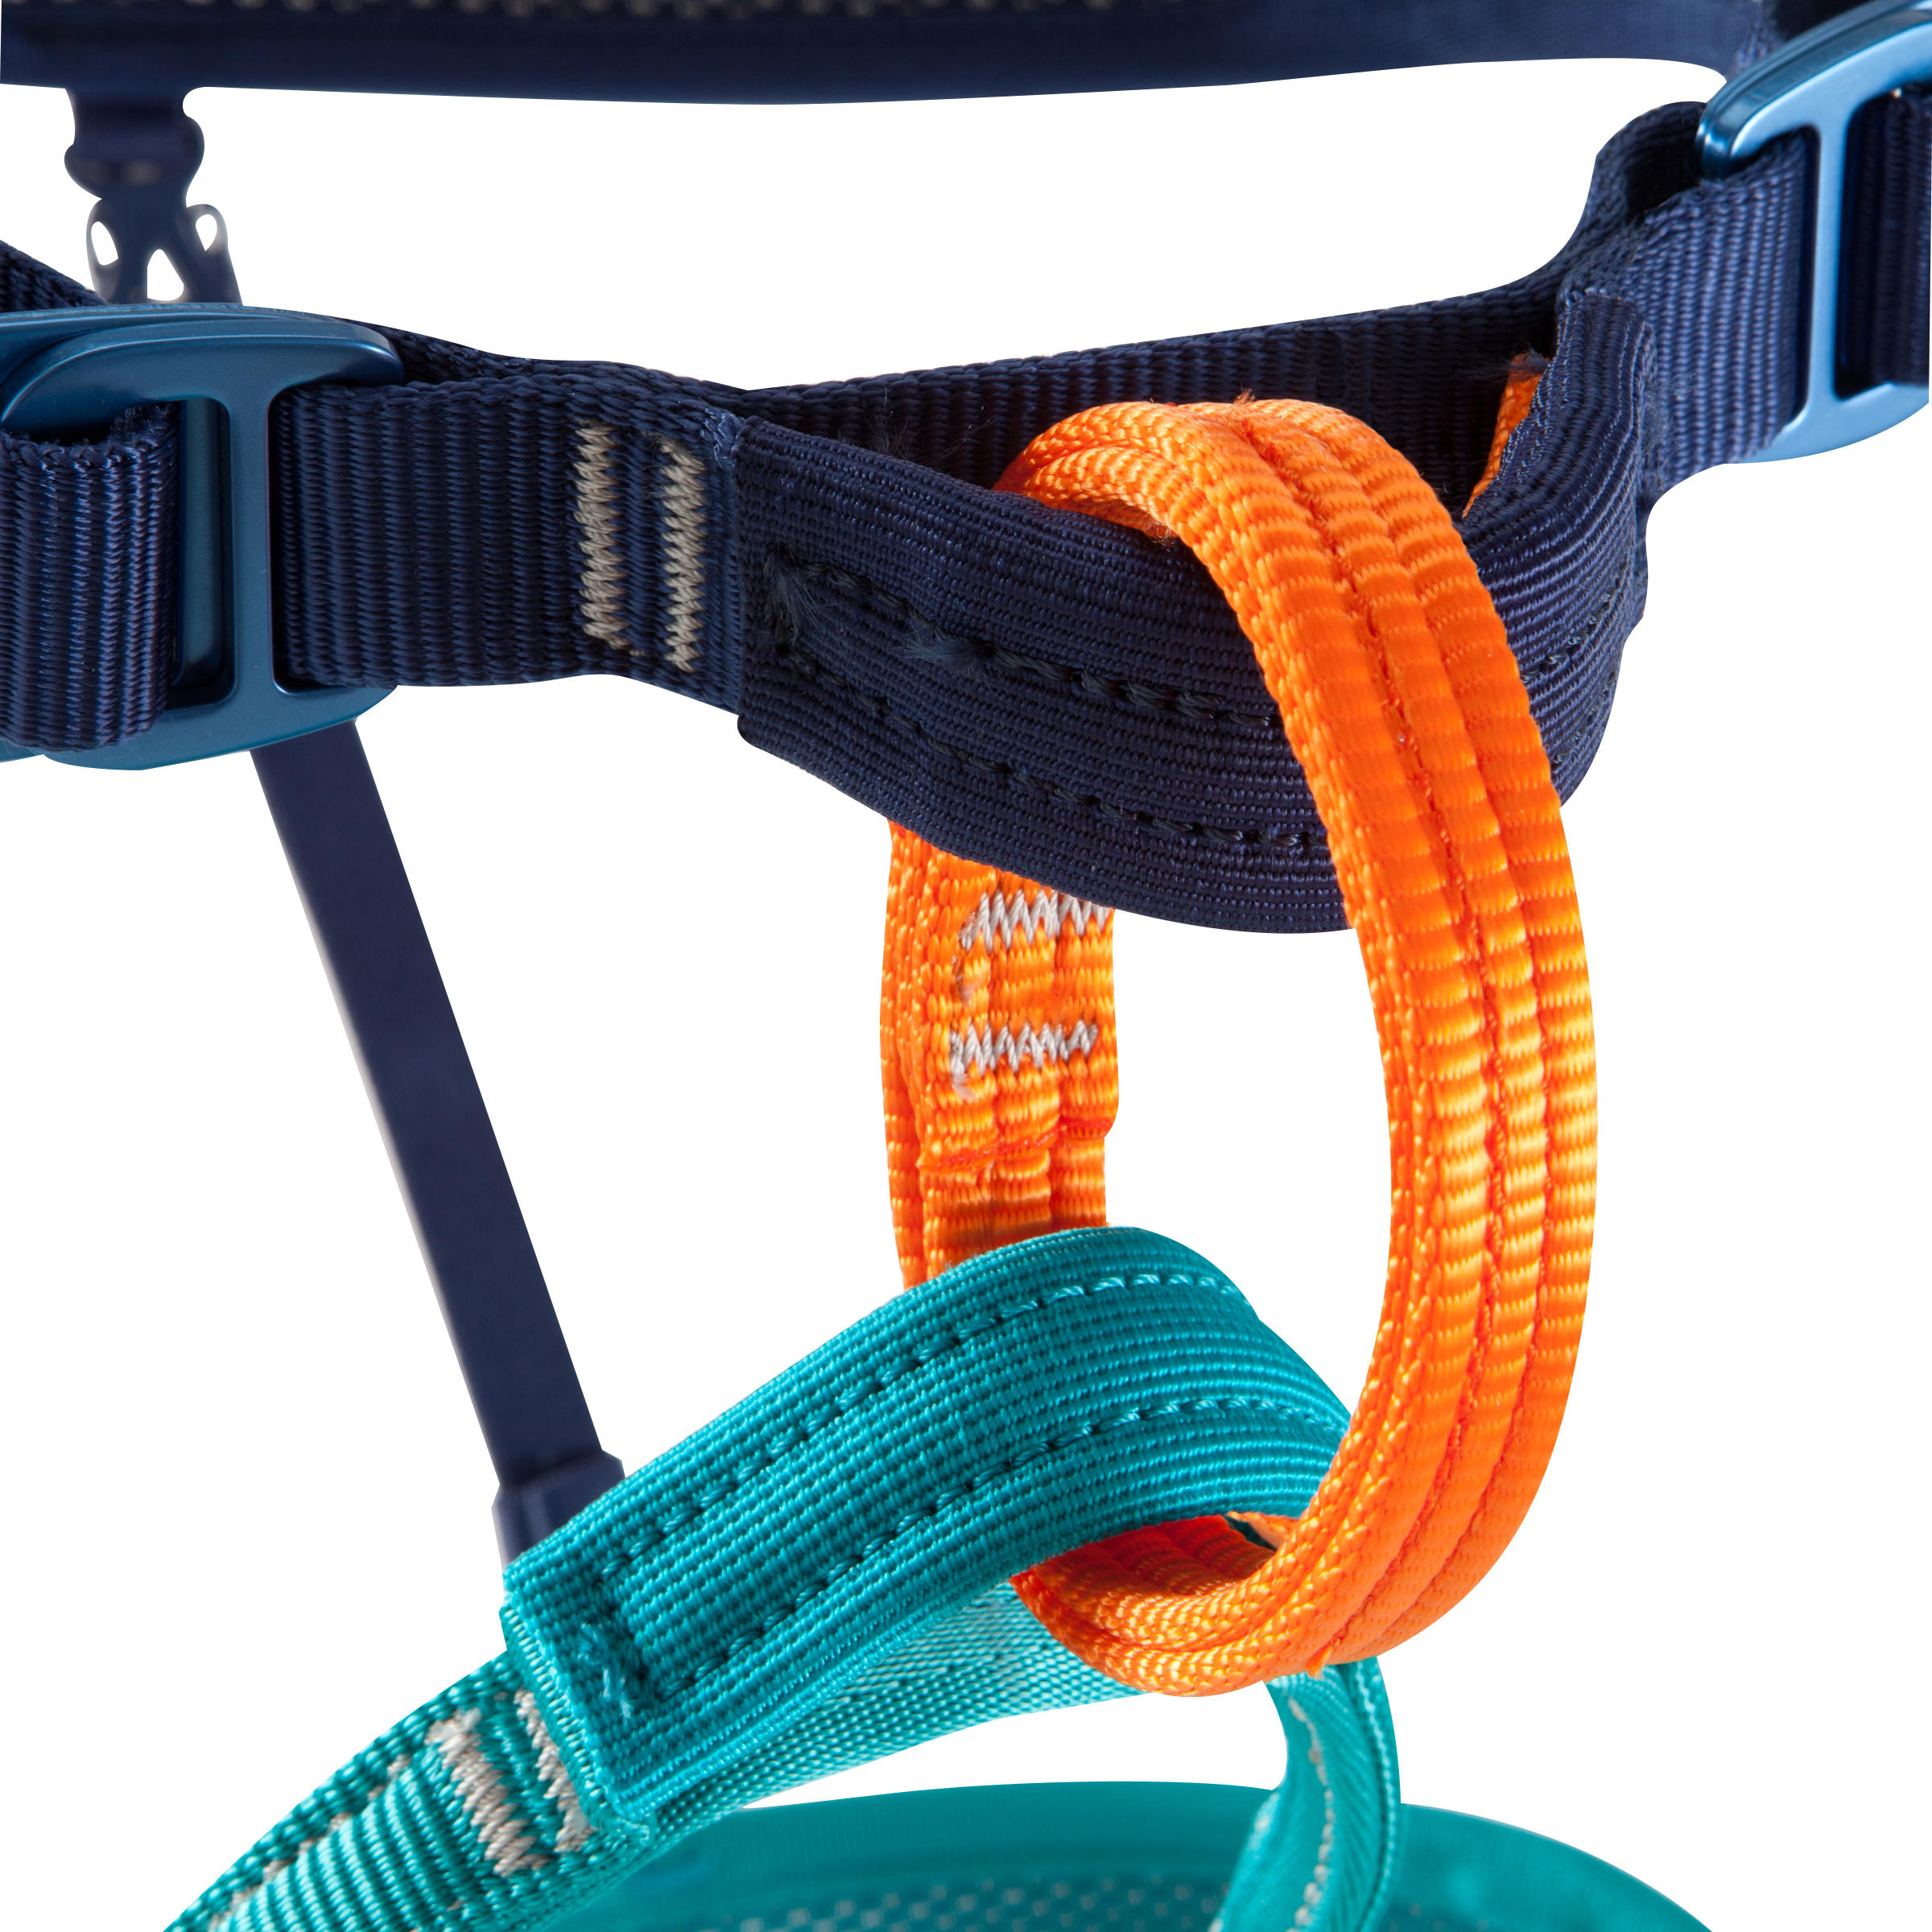 ROCK CLIMBING AND MOUNTAINEERING HARNESS - ROCK BLUE 4/9